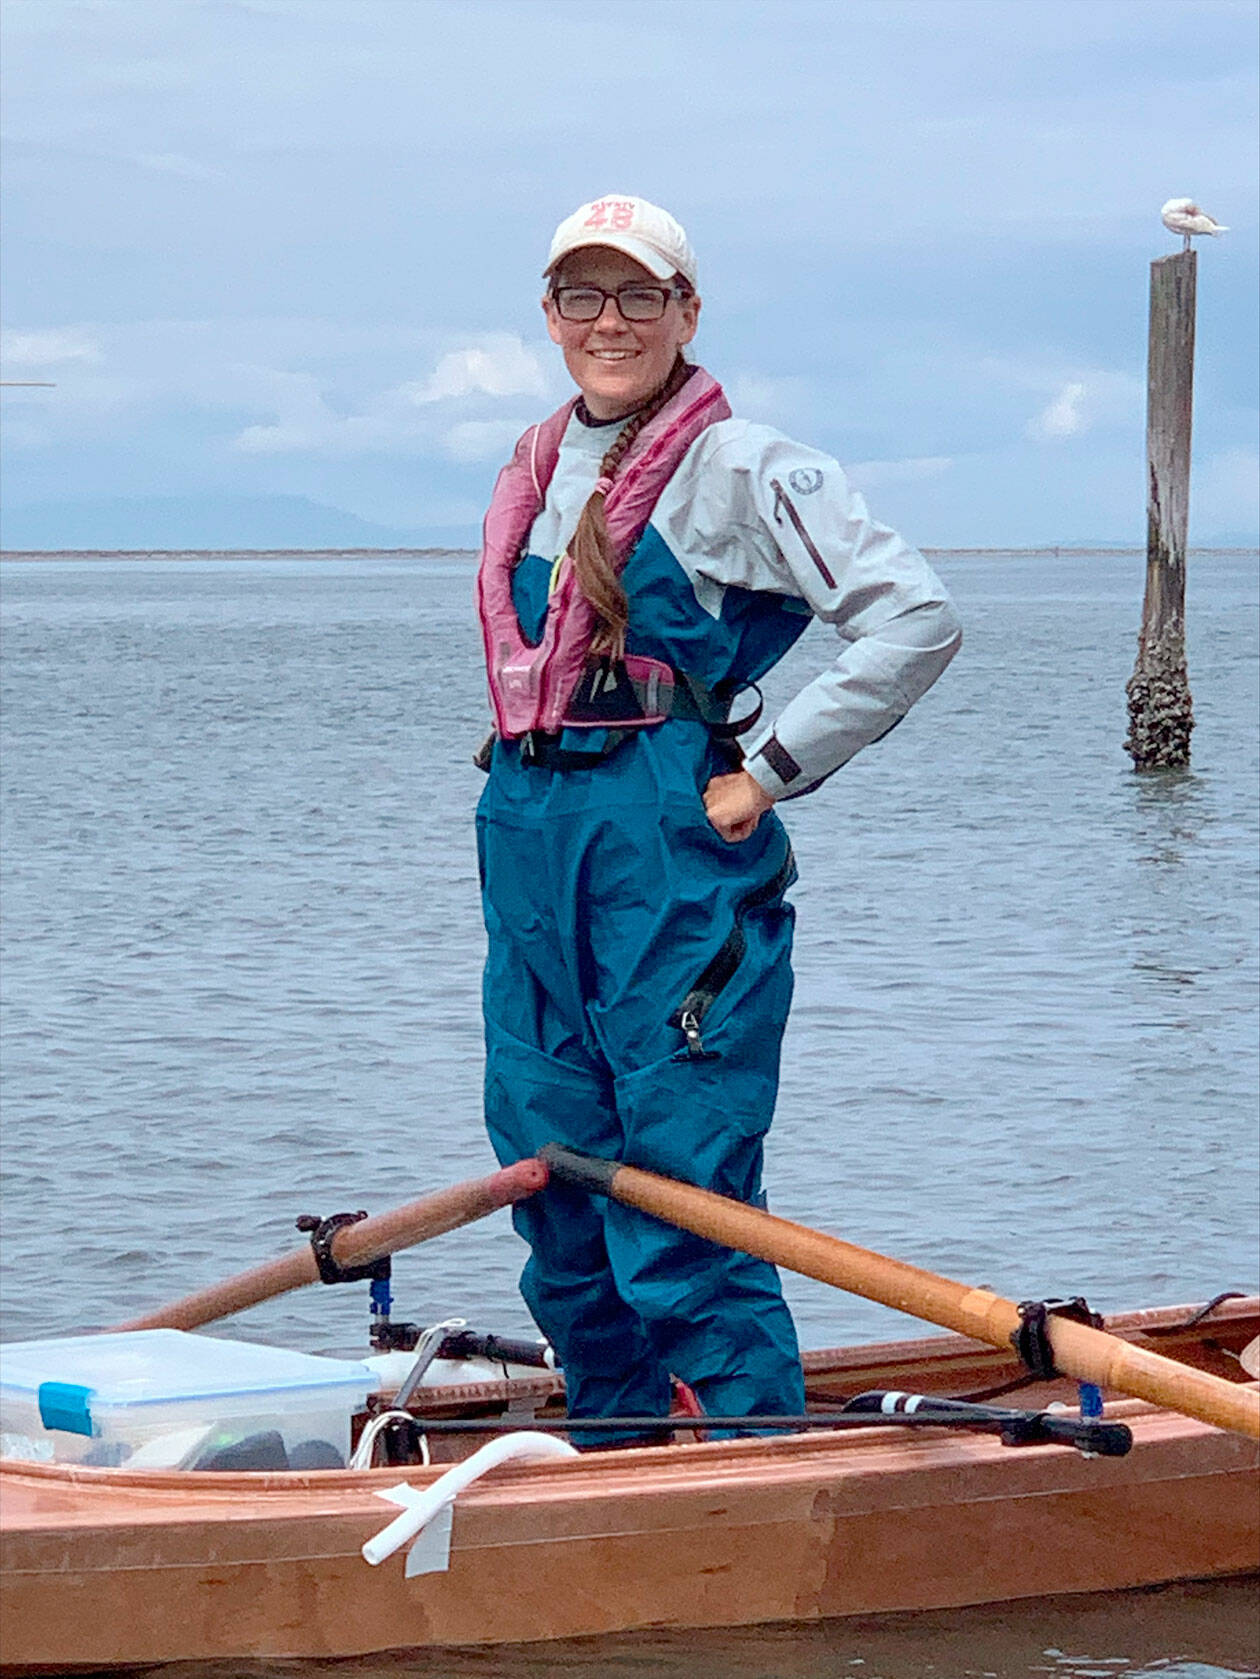 Lillian Kuehl built the 18-foot rowboat she will race the 750 miles from Port Townsend to Ketchikan in her Port Angeles living room. This is the second time that Kuehl, 37, who is from Quilcene, is competing in the Race to Alaska. (Photo David Linger)